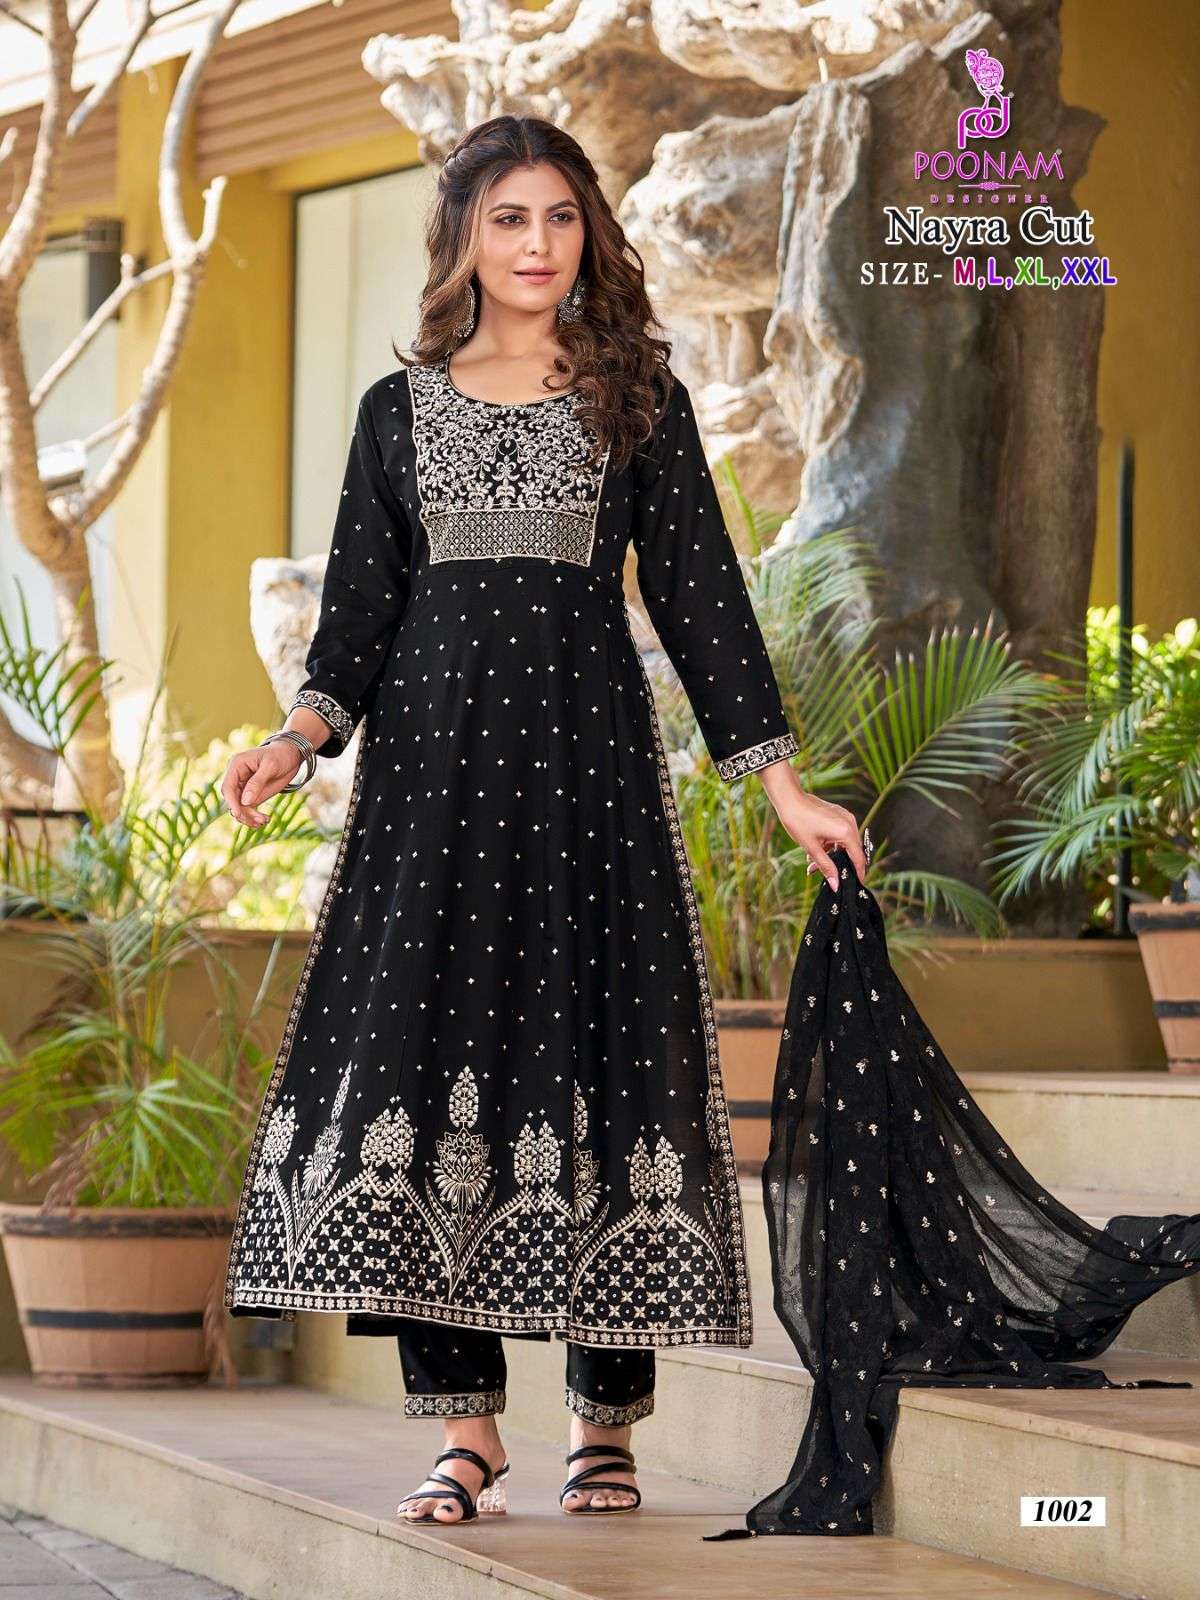 Trending Nayra Cut Suits Designs for Women